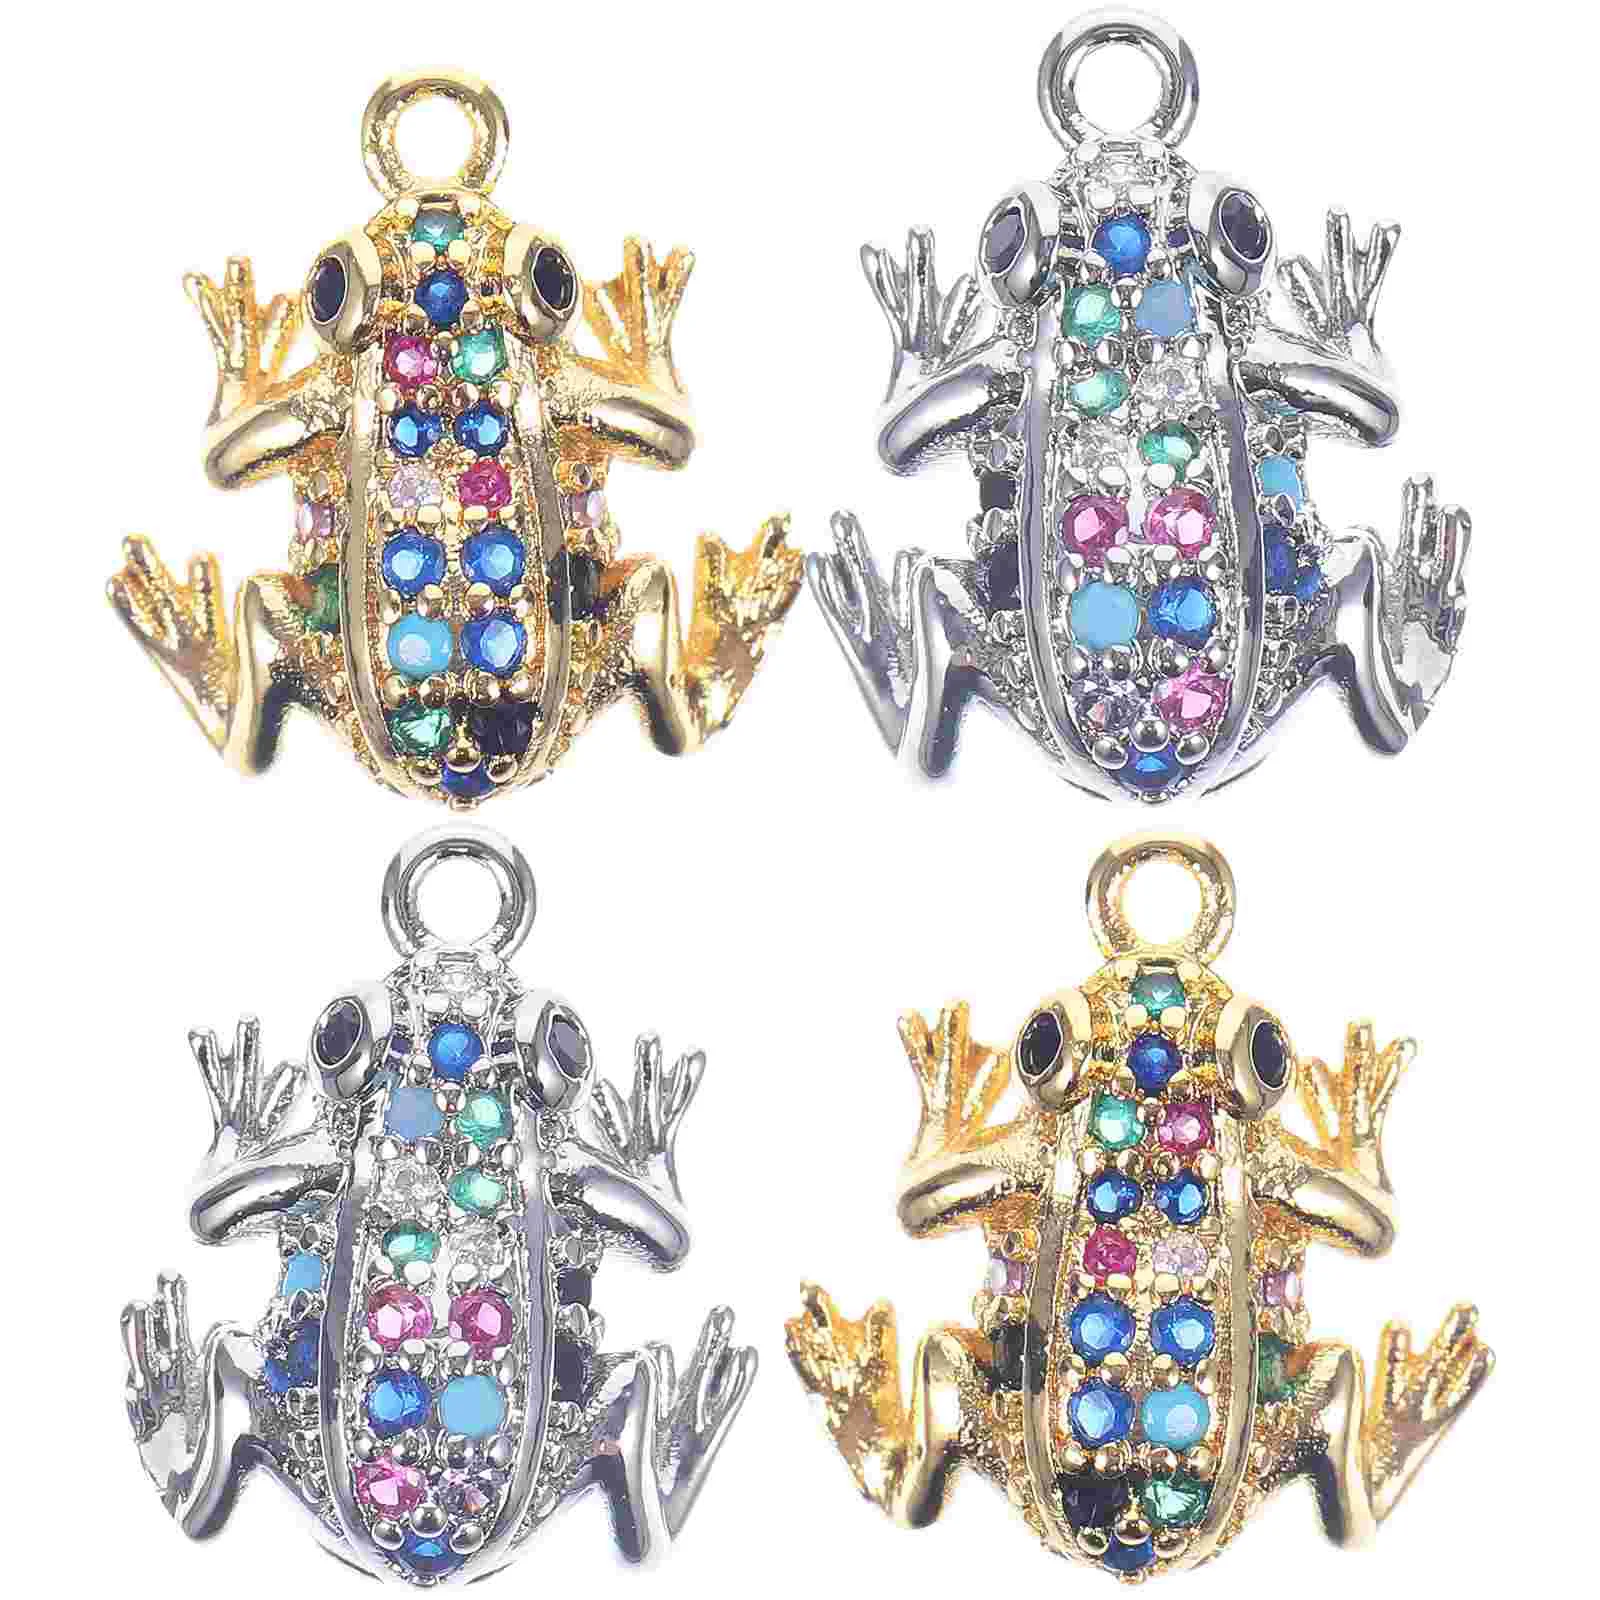 

4 Pcs Fancy Color Diamond Frog Pendant Metal Jewelry Making Accessories Amulet Animal Charms Brass DIY Hanging Ornament